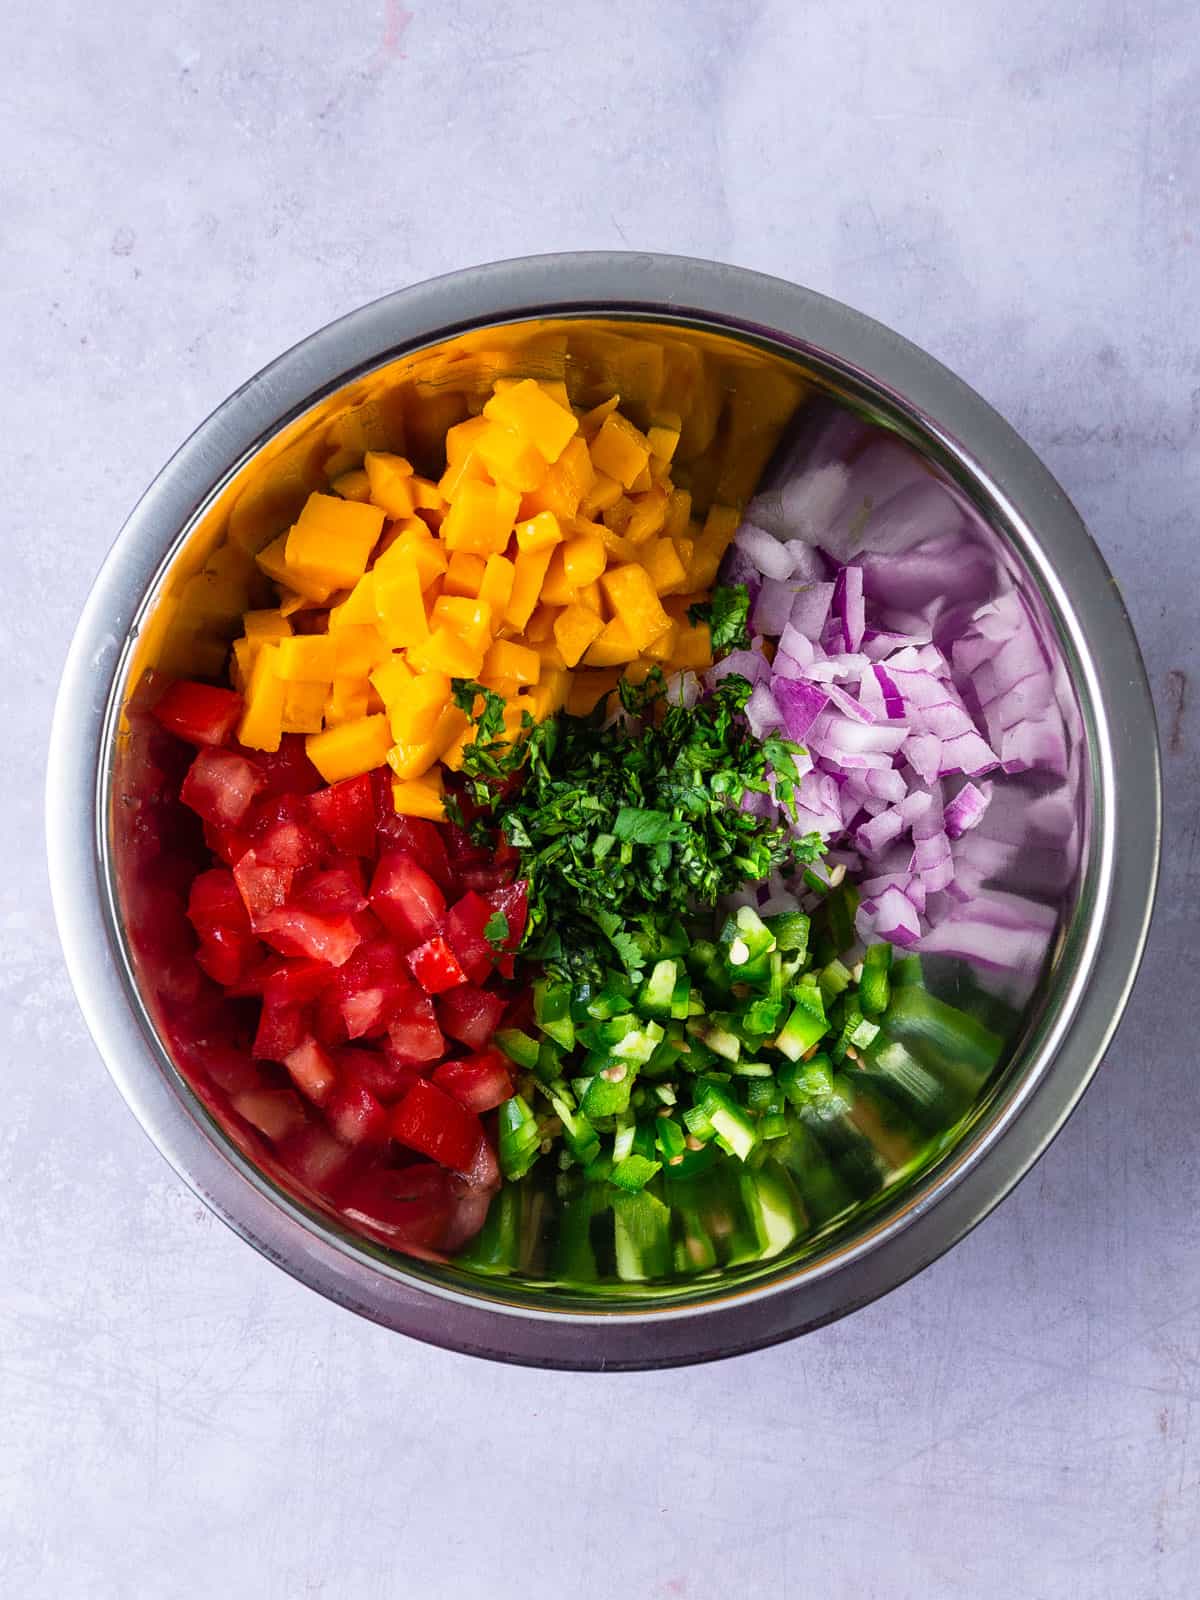 Add all of the mango pico de gallo ingredients to a bowl.